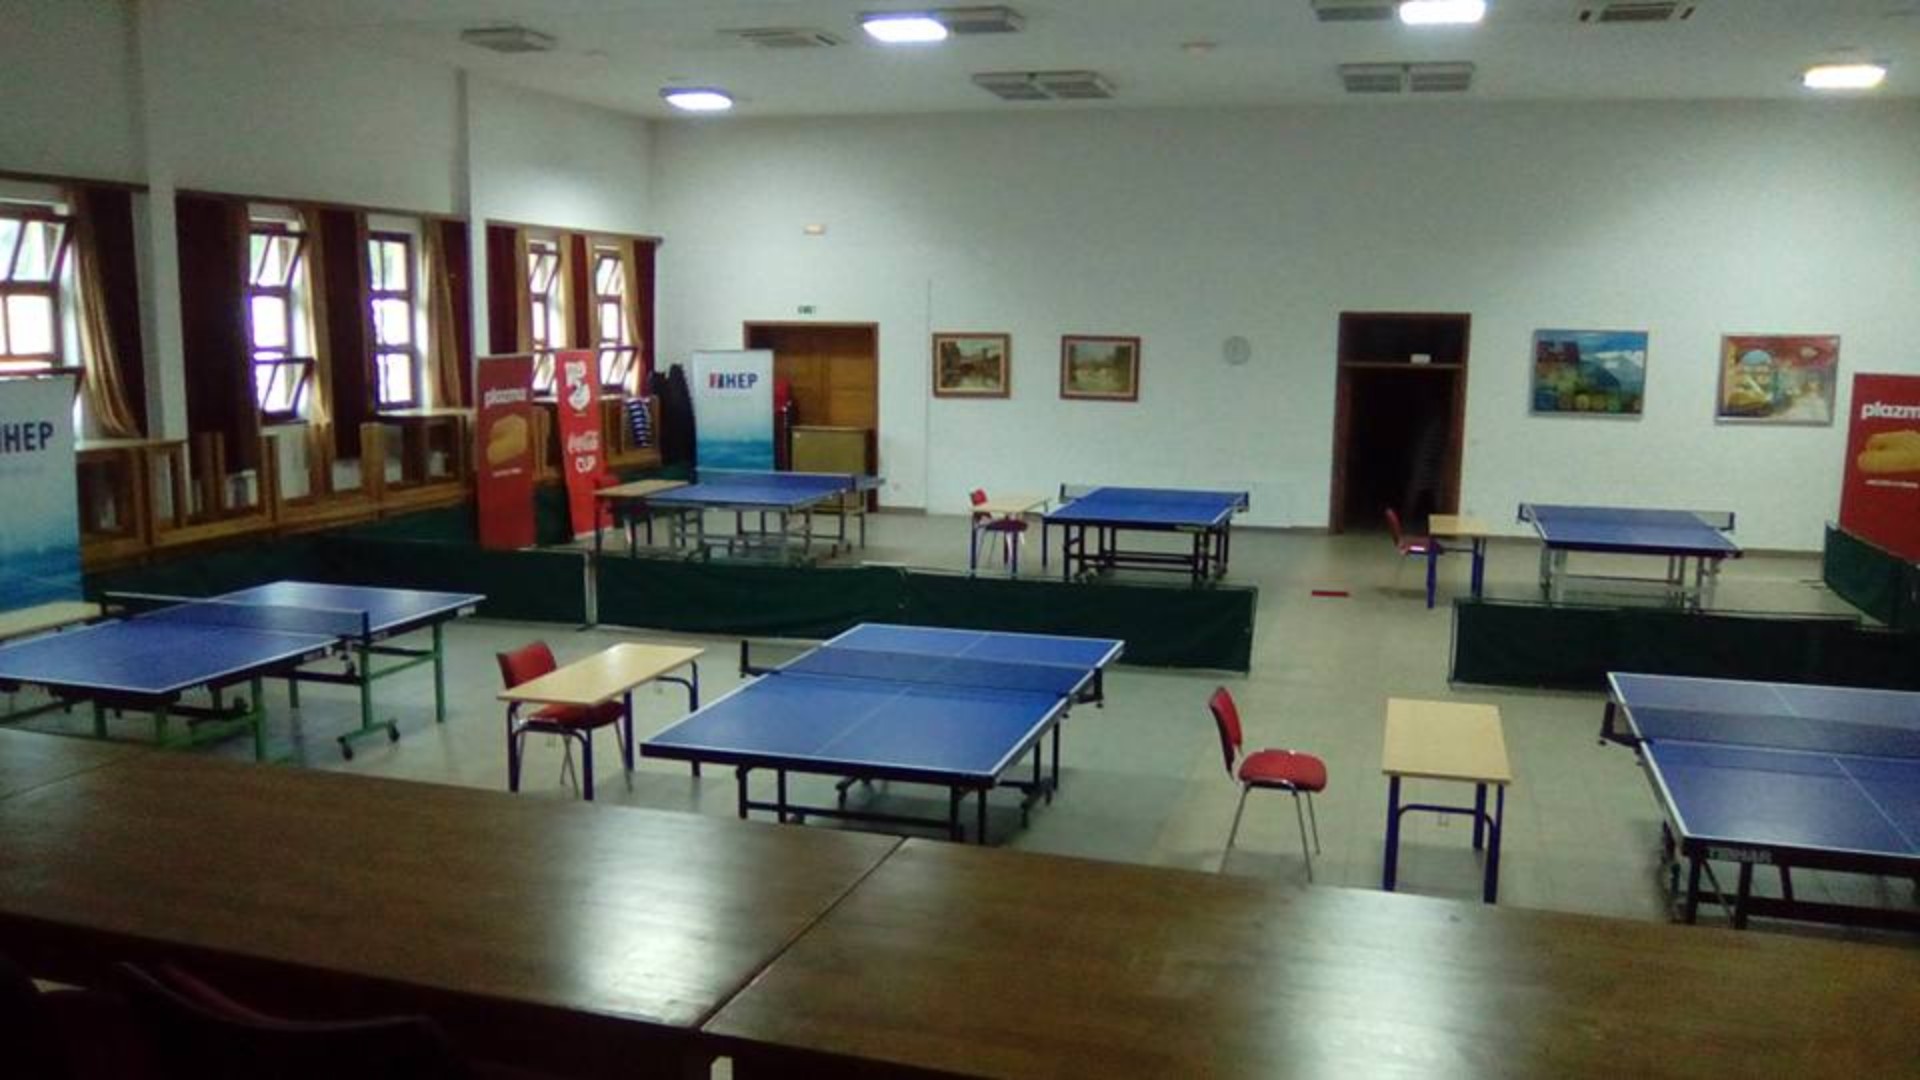 Playing area